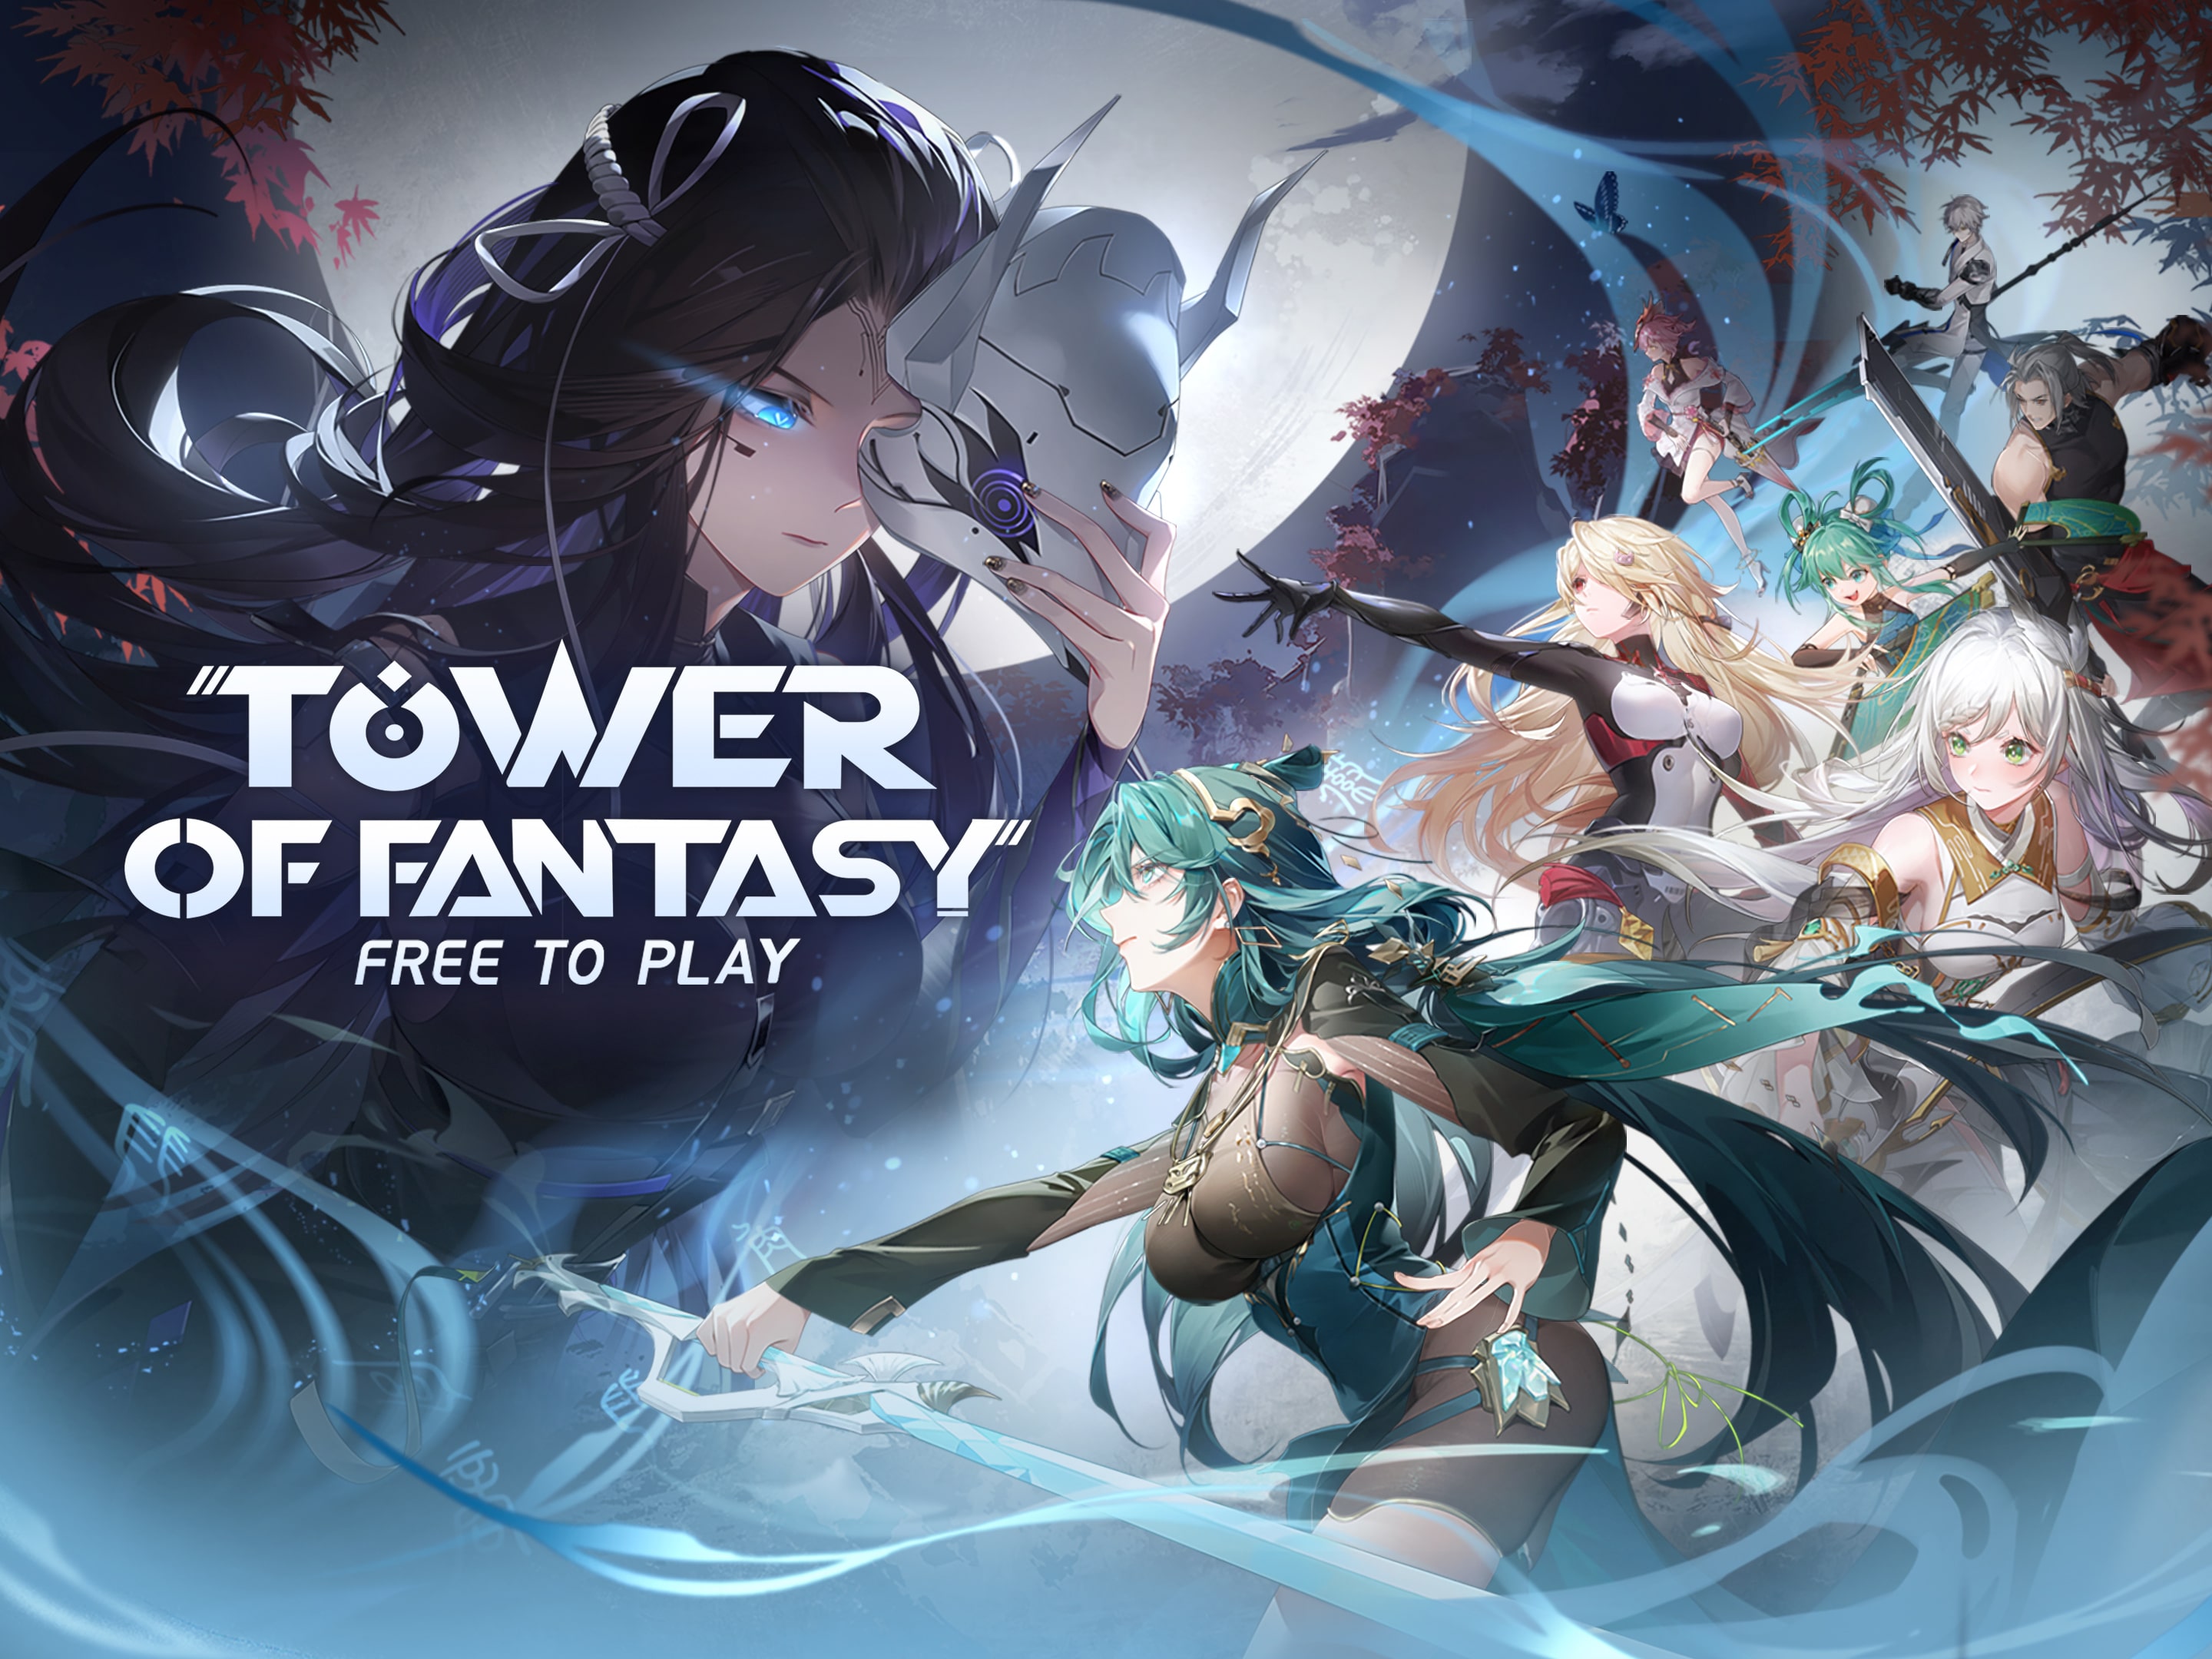 You can now pre-download the shared - Tower of Fantasy